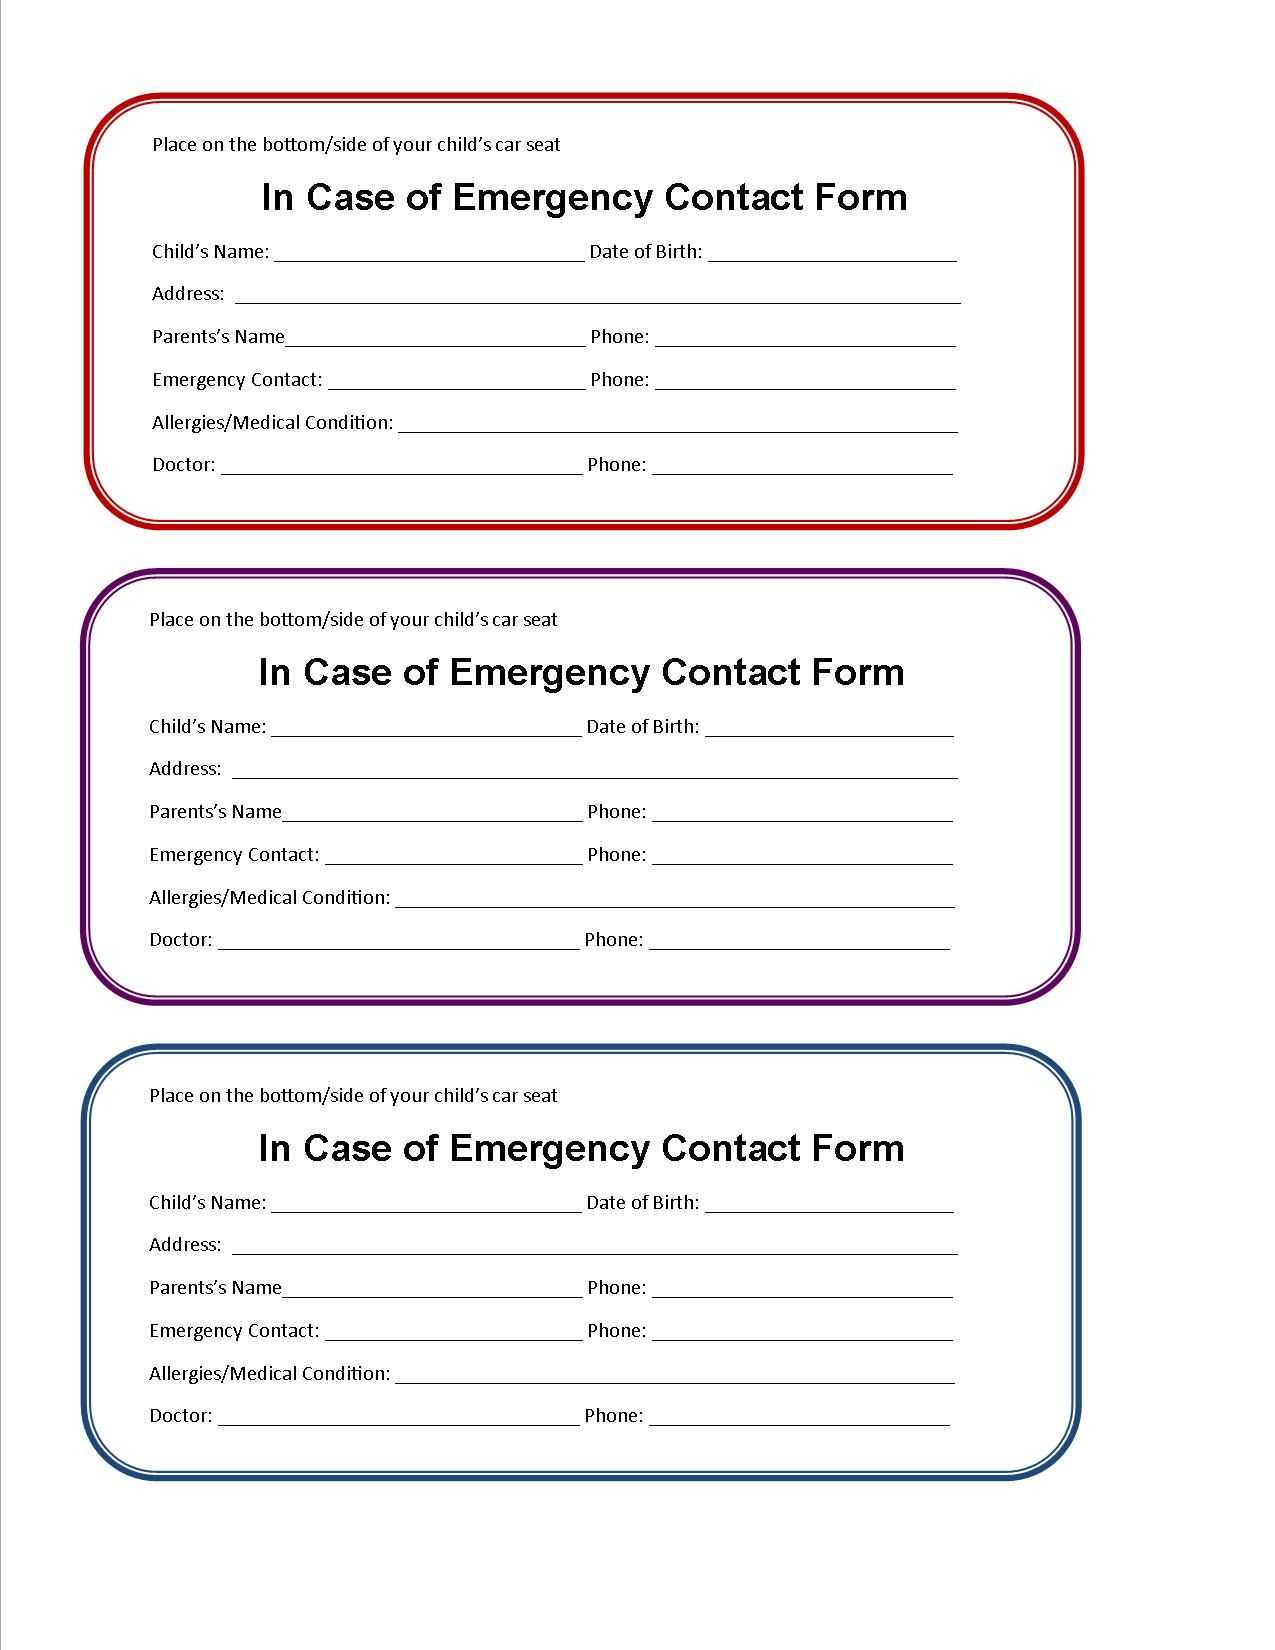 Printable Emergency Contact Form For Car Seat | Super Mom I Intended For Medical Alert Wallet Card Template